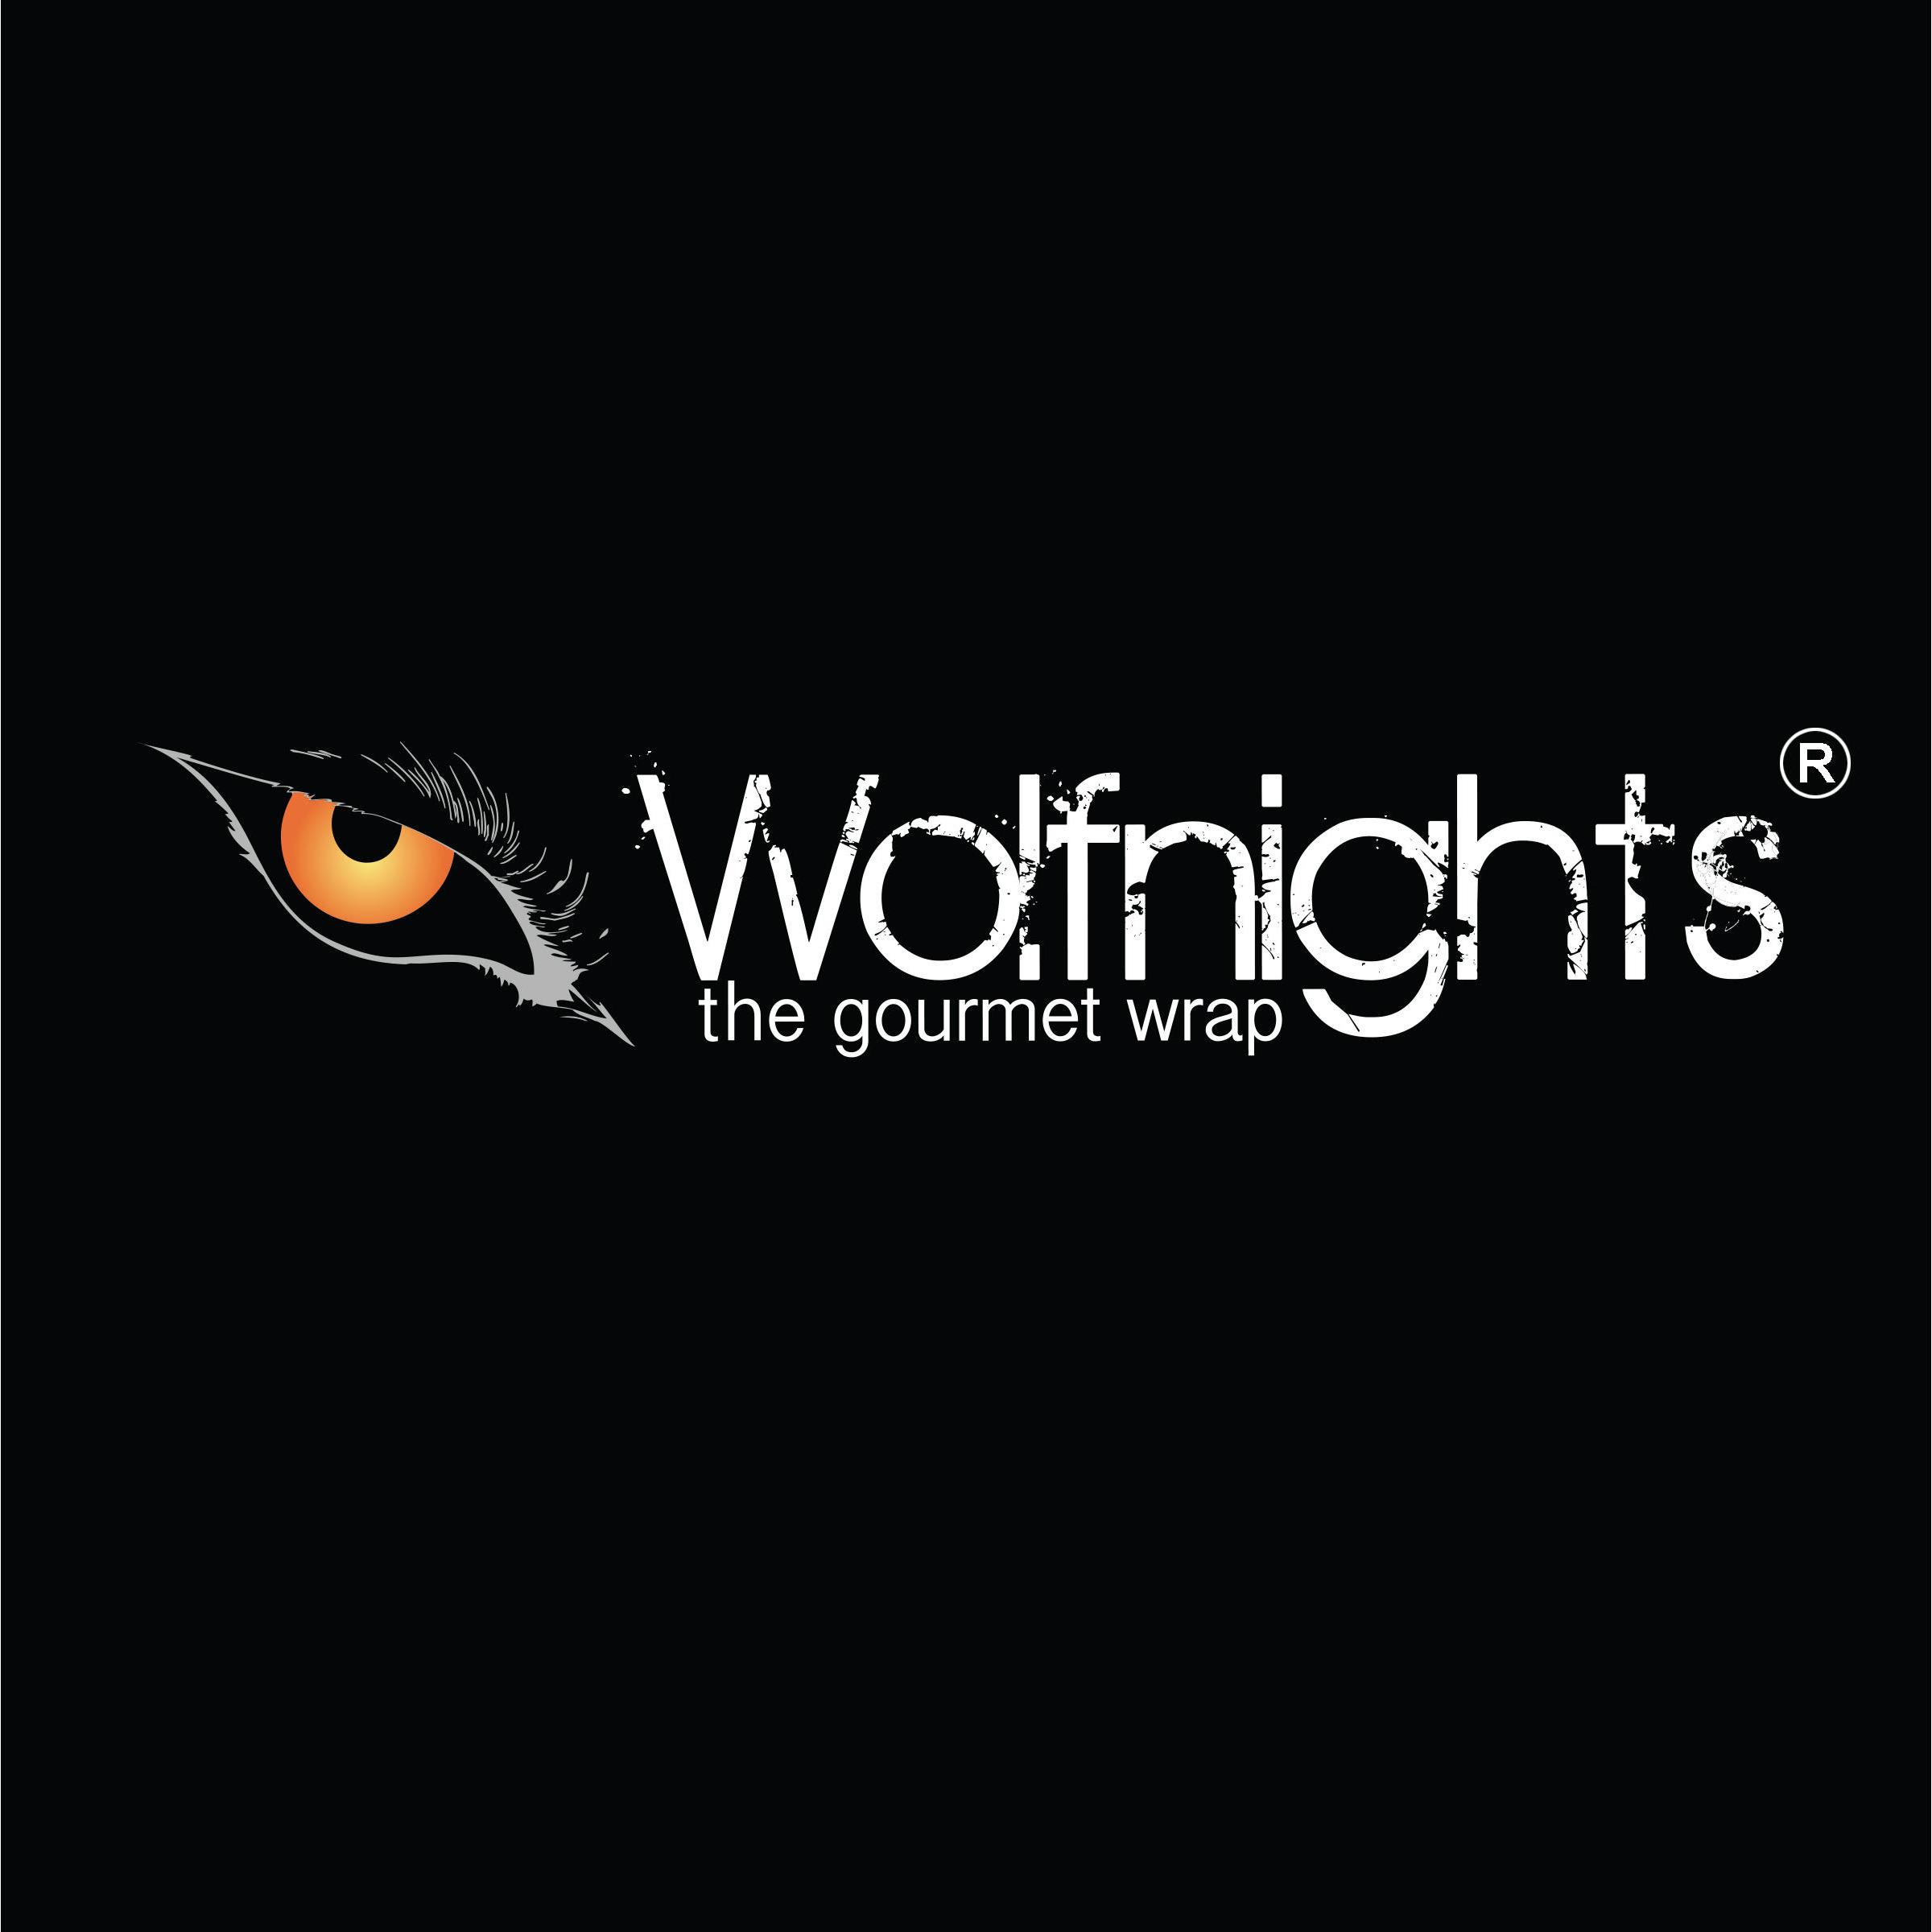 Wolfnights - The Gourmet Wrap - New York, NY 10016 - (877)497-1697 | ShowMeLocal.com